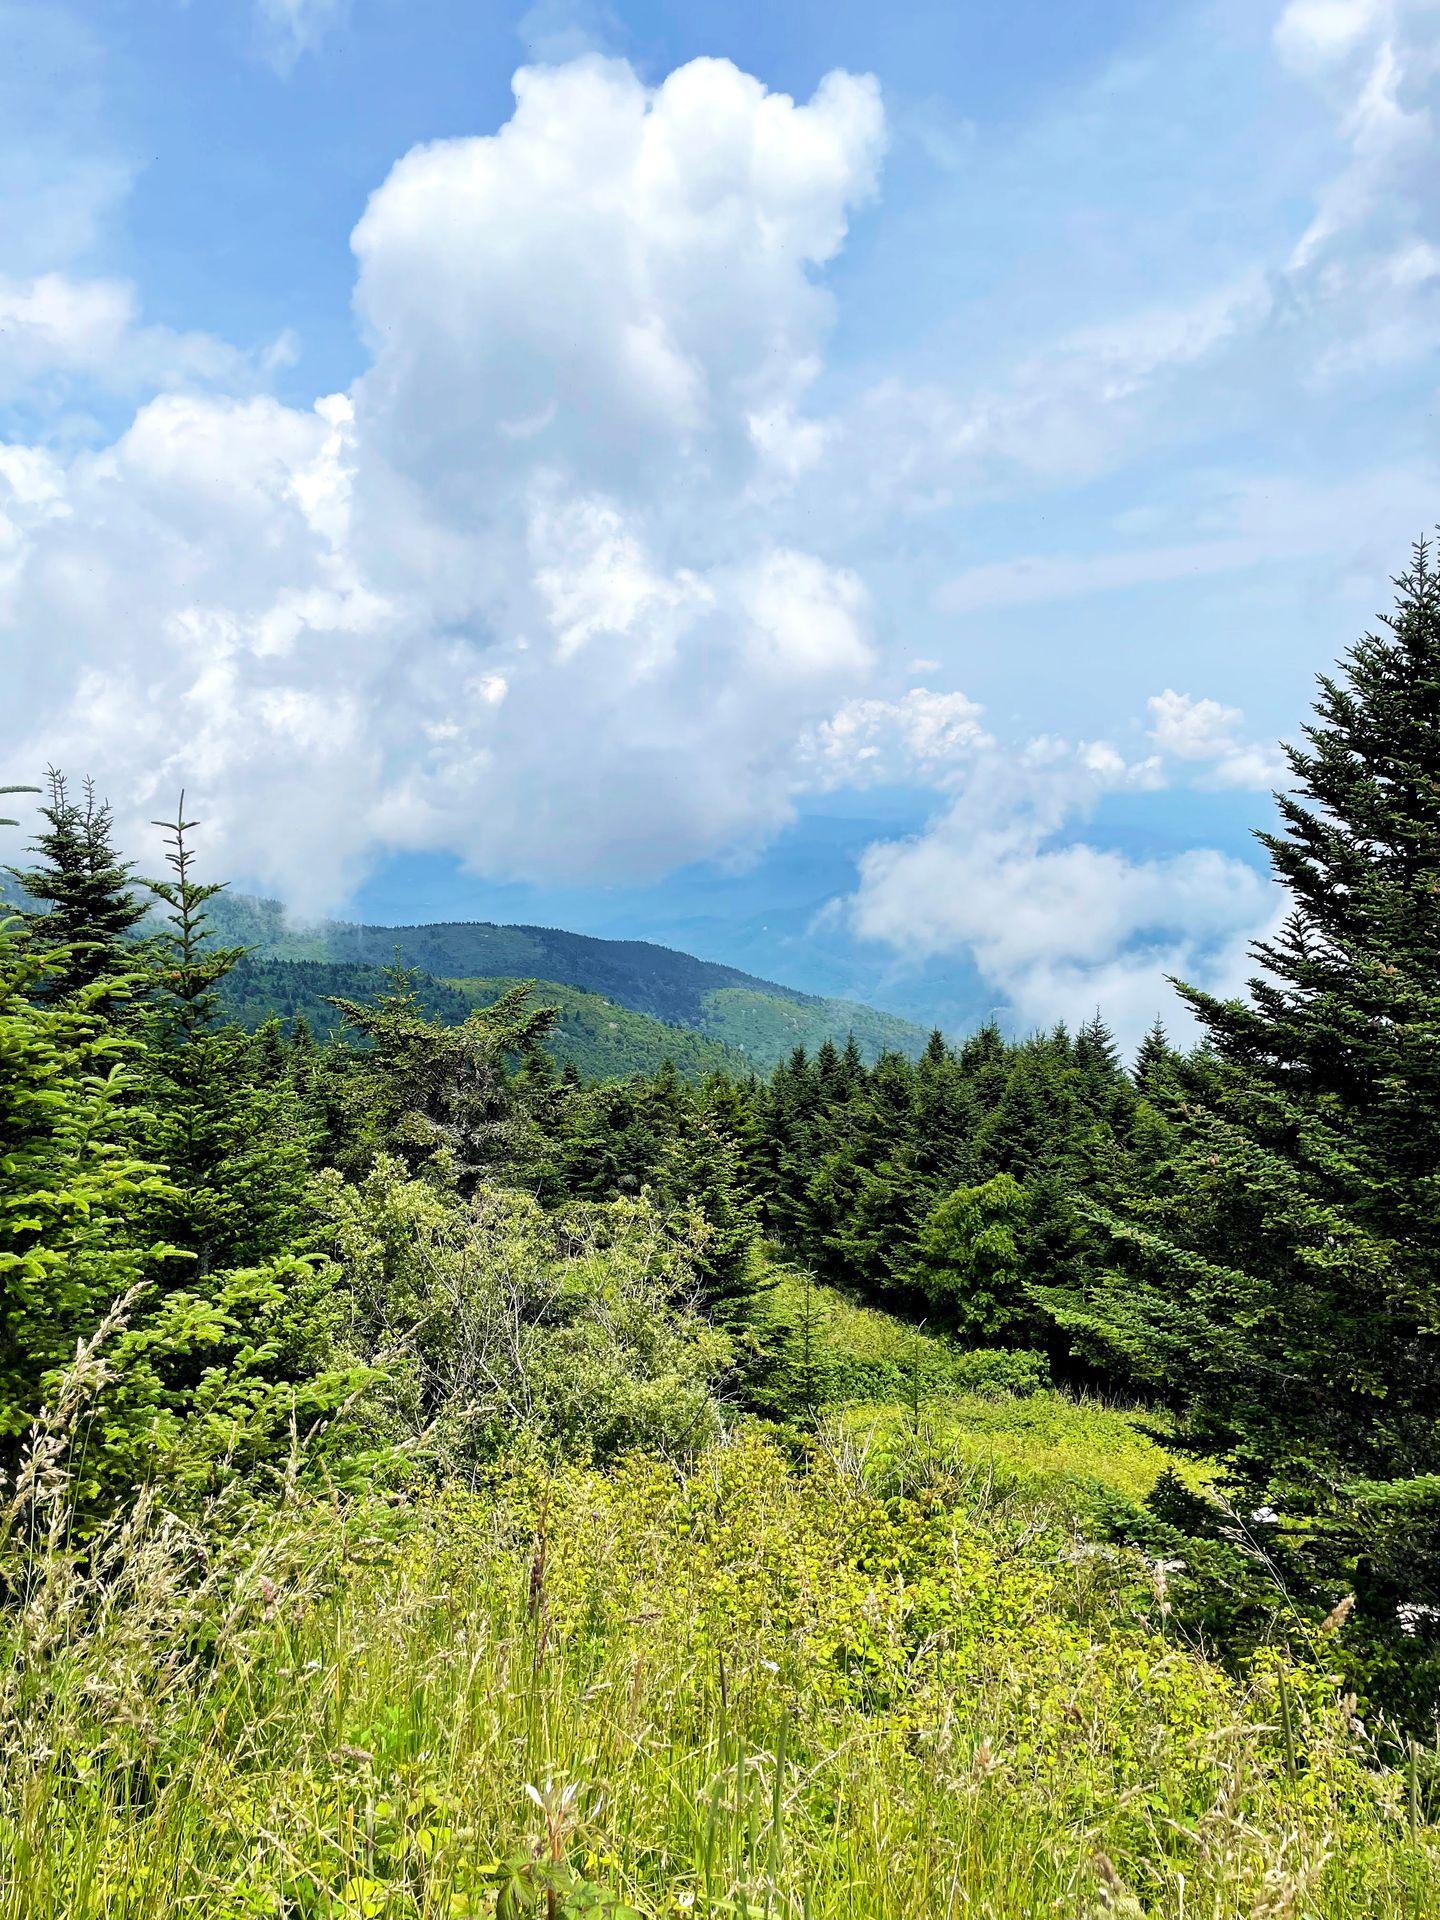 A view of a mountain and trees from Mount Mitchell.